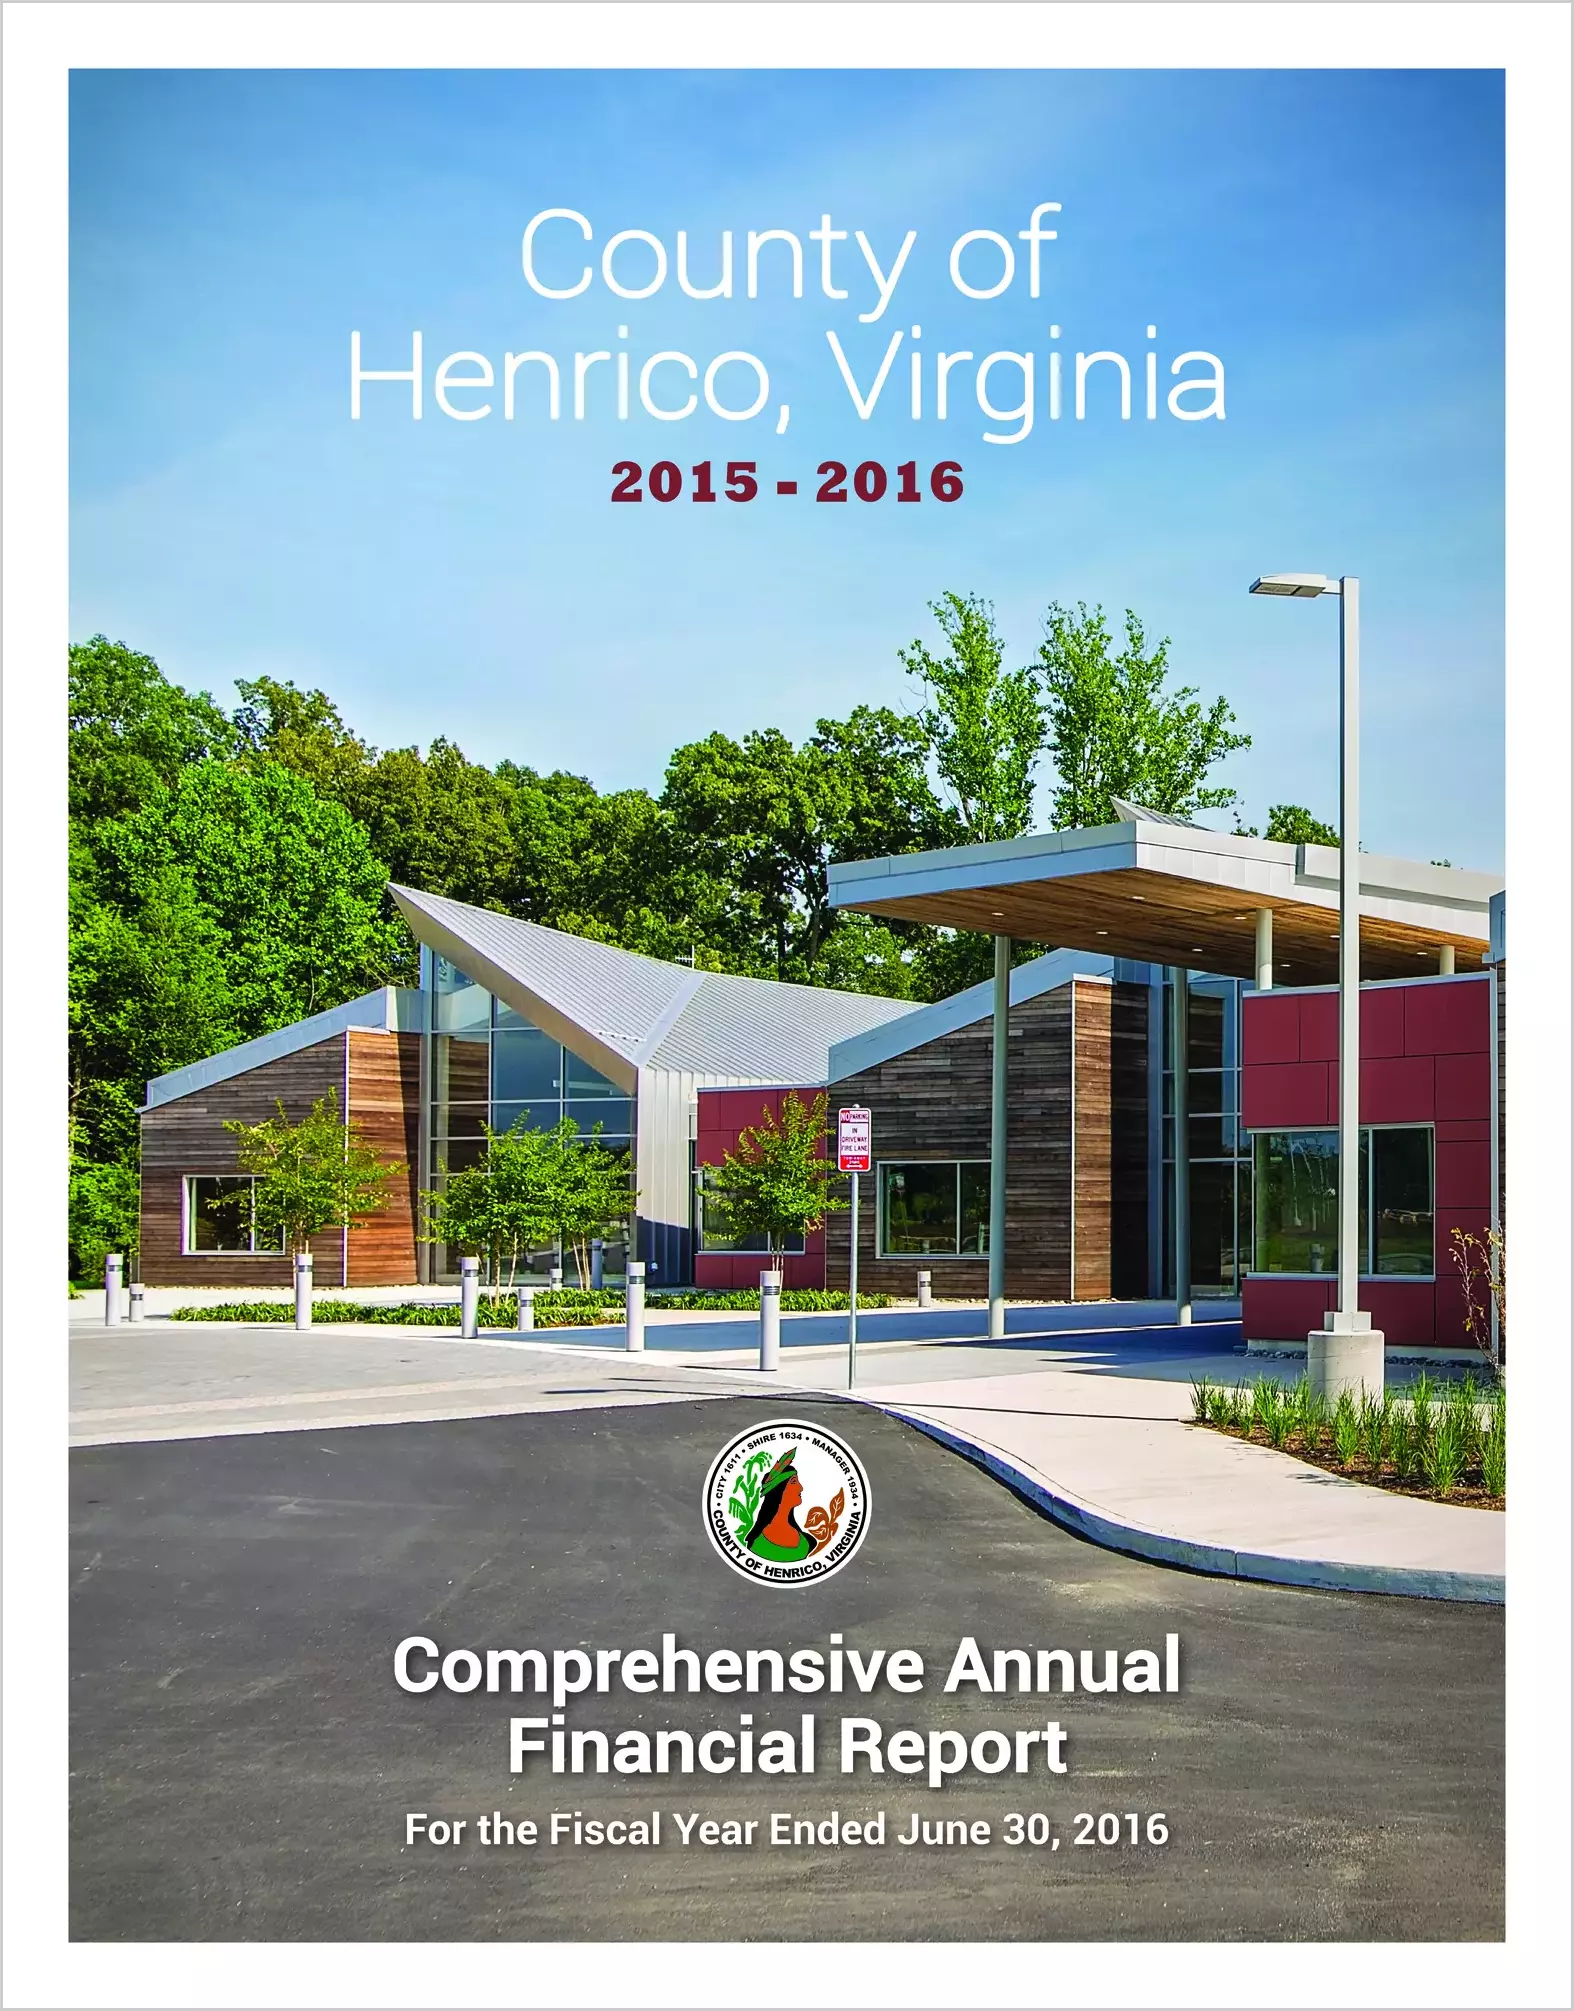 2016 Annual Financial Report for County of Henrico